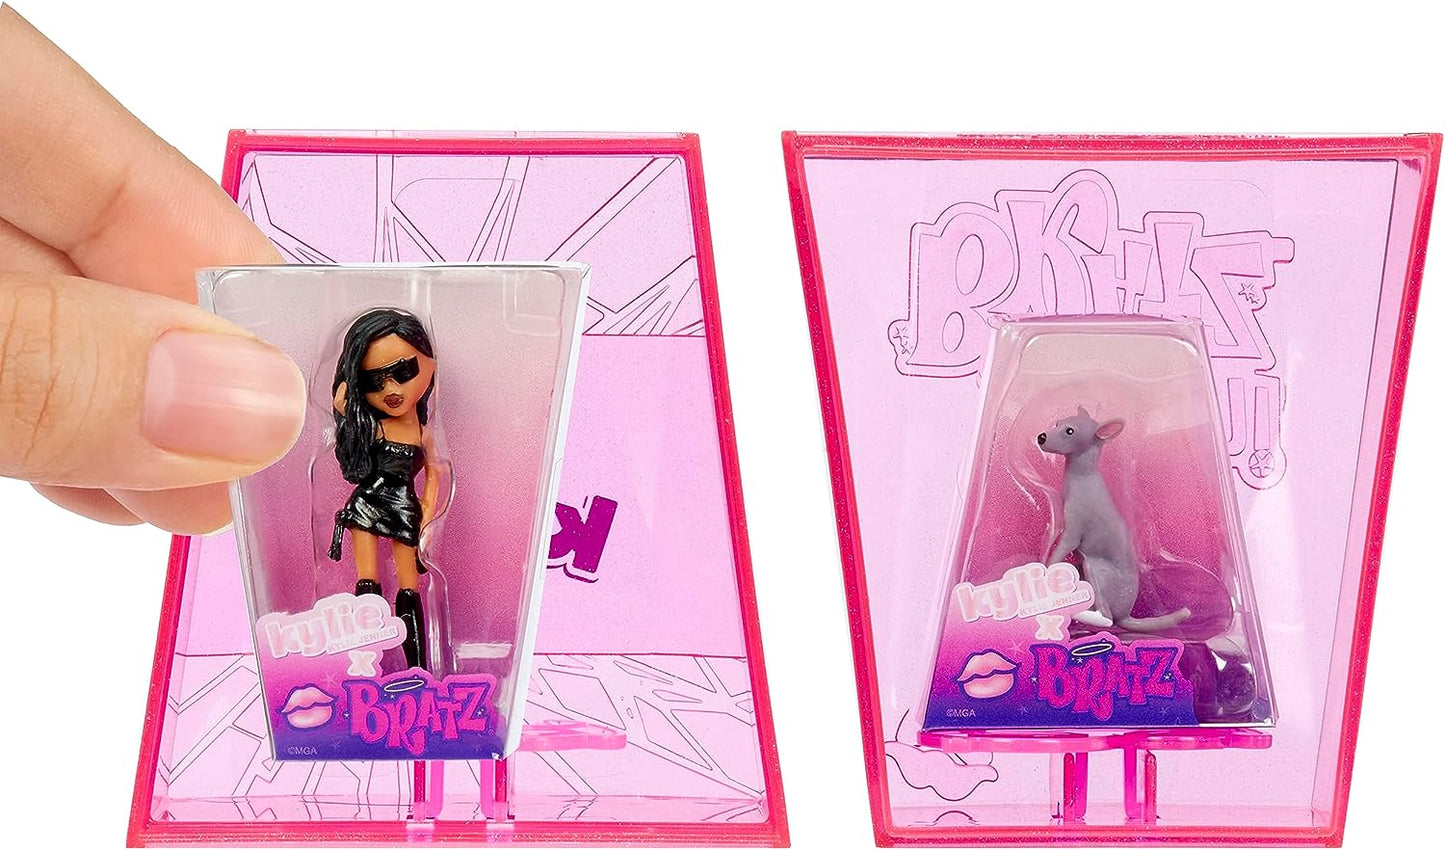 Mini X Kylie Jenner - Series 1-2 Mini  in Each Pack - Blind Packaging Doubles as Display - Collectible Figures for Kids and Collectors Ages 6+ Years